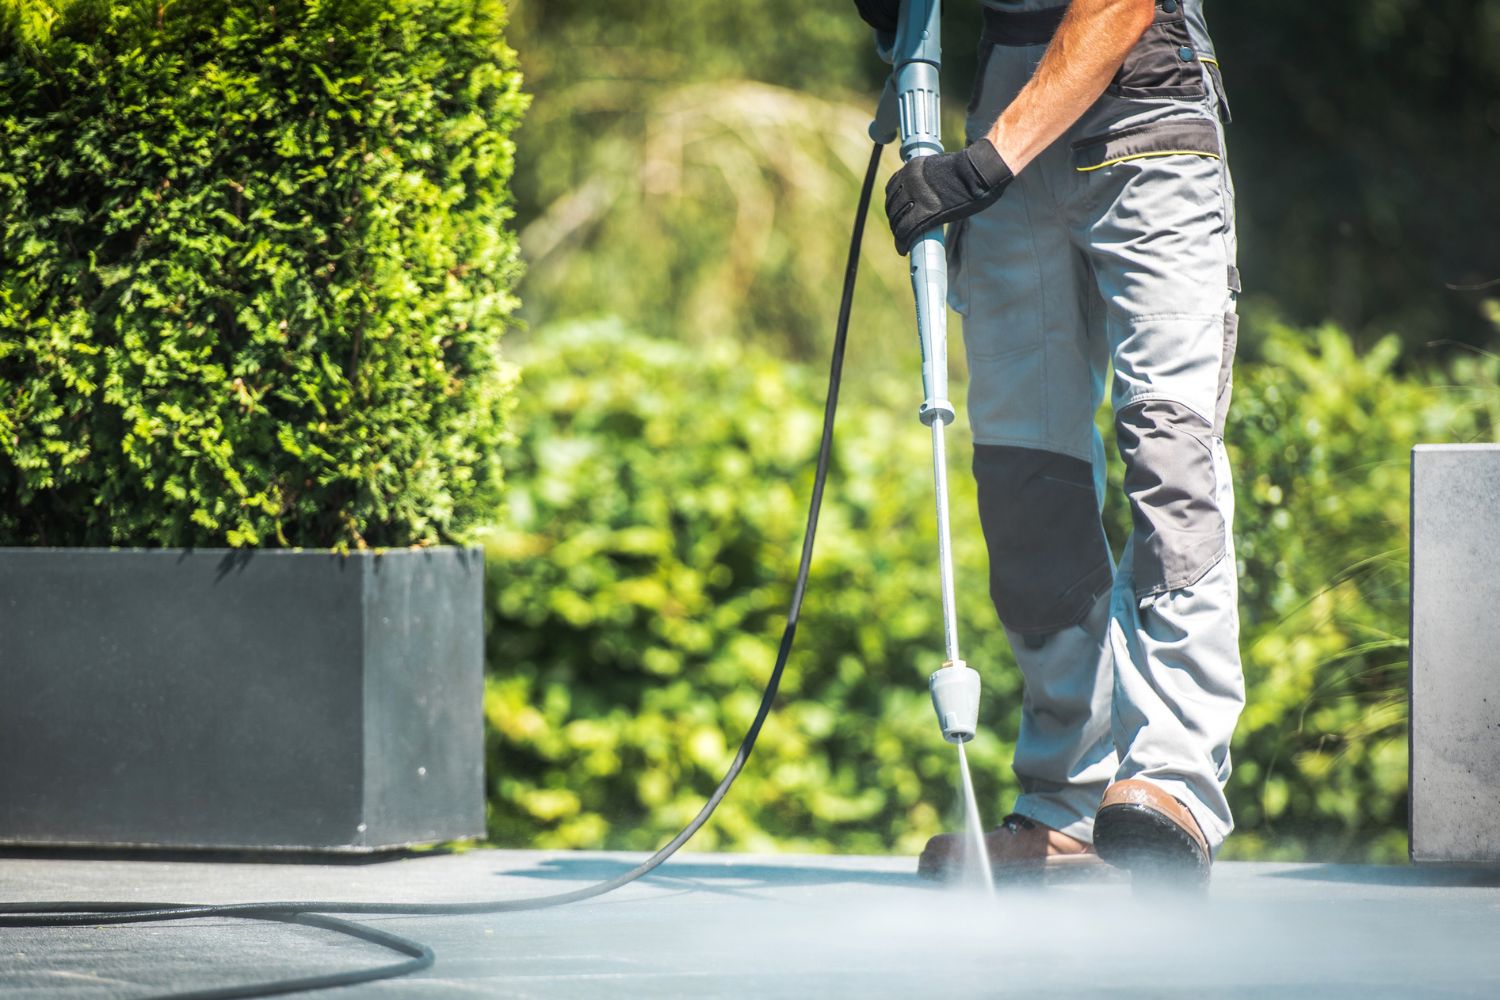 Concrete Cleaning and Sealing Services Costs